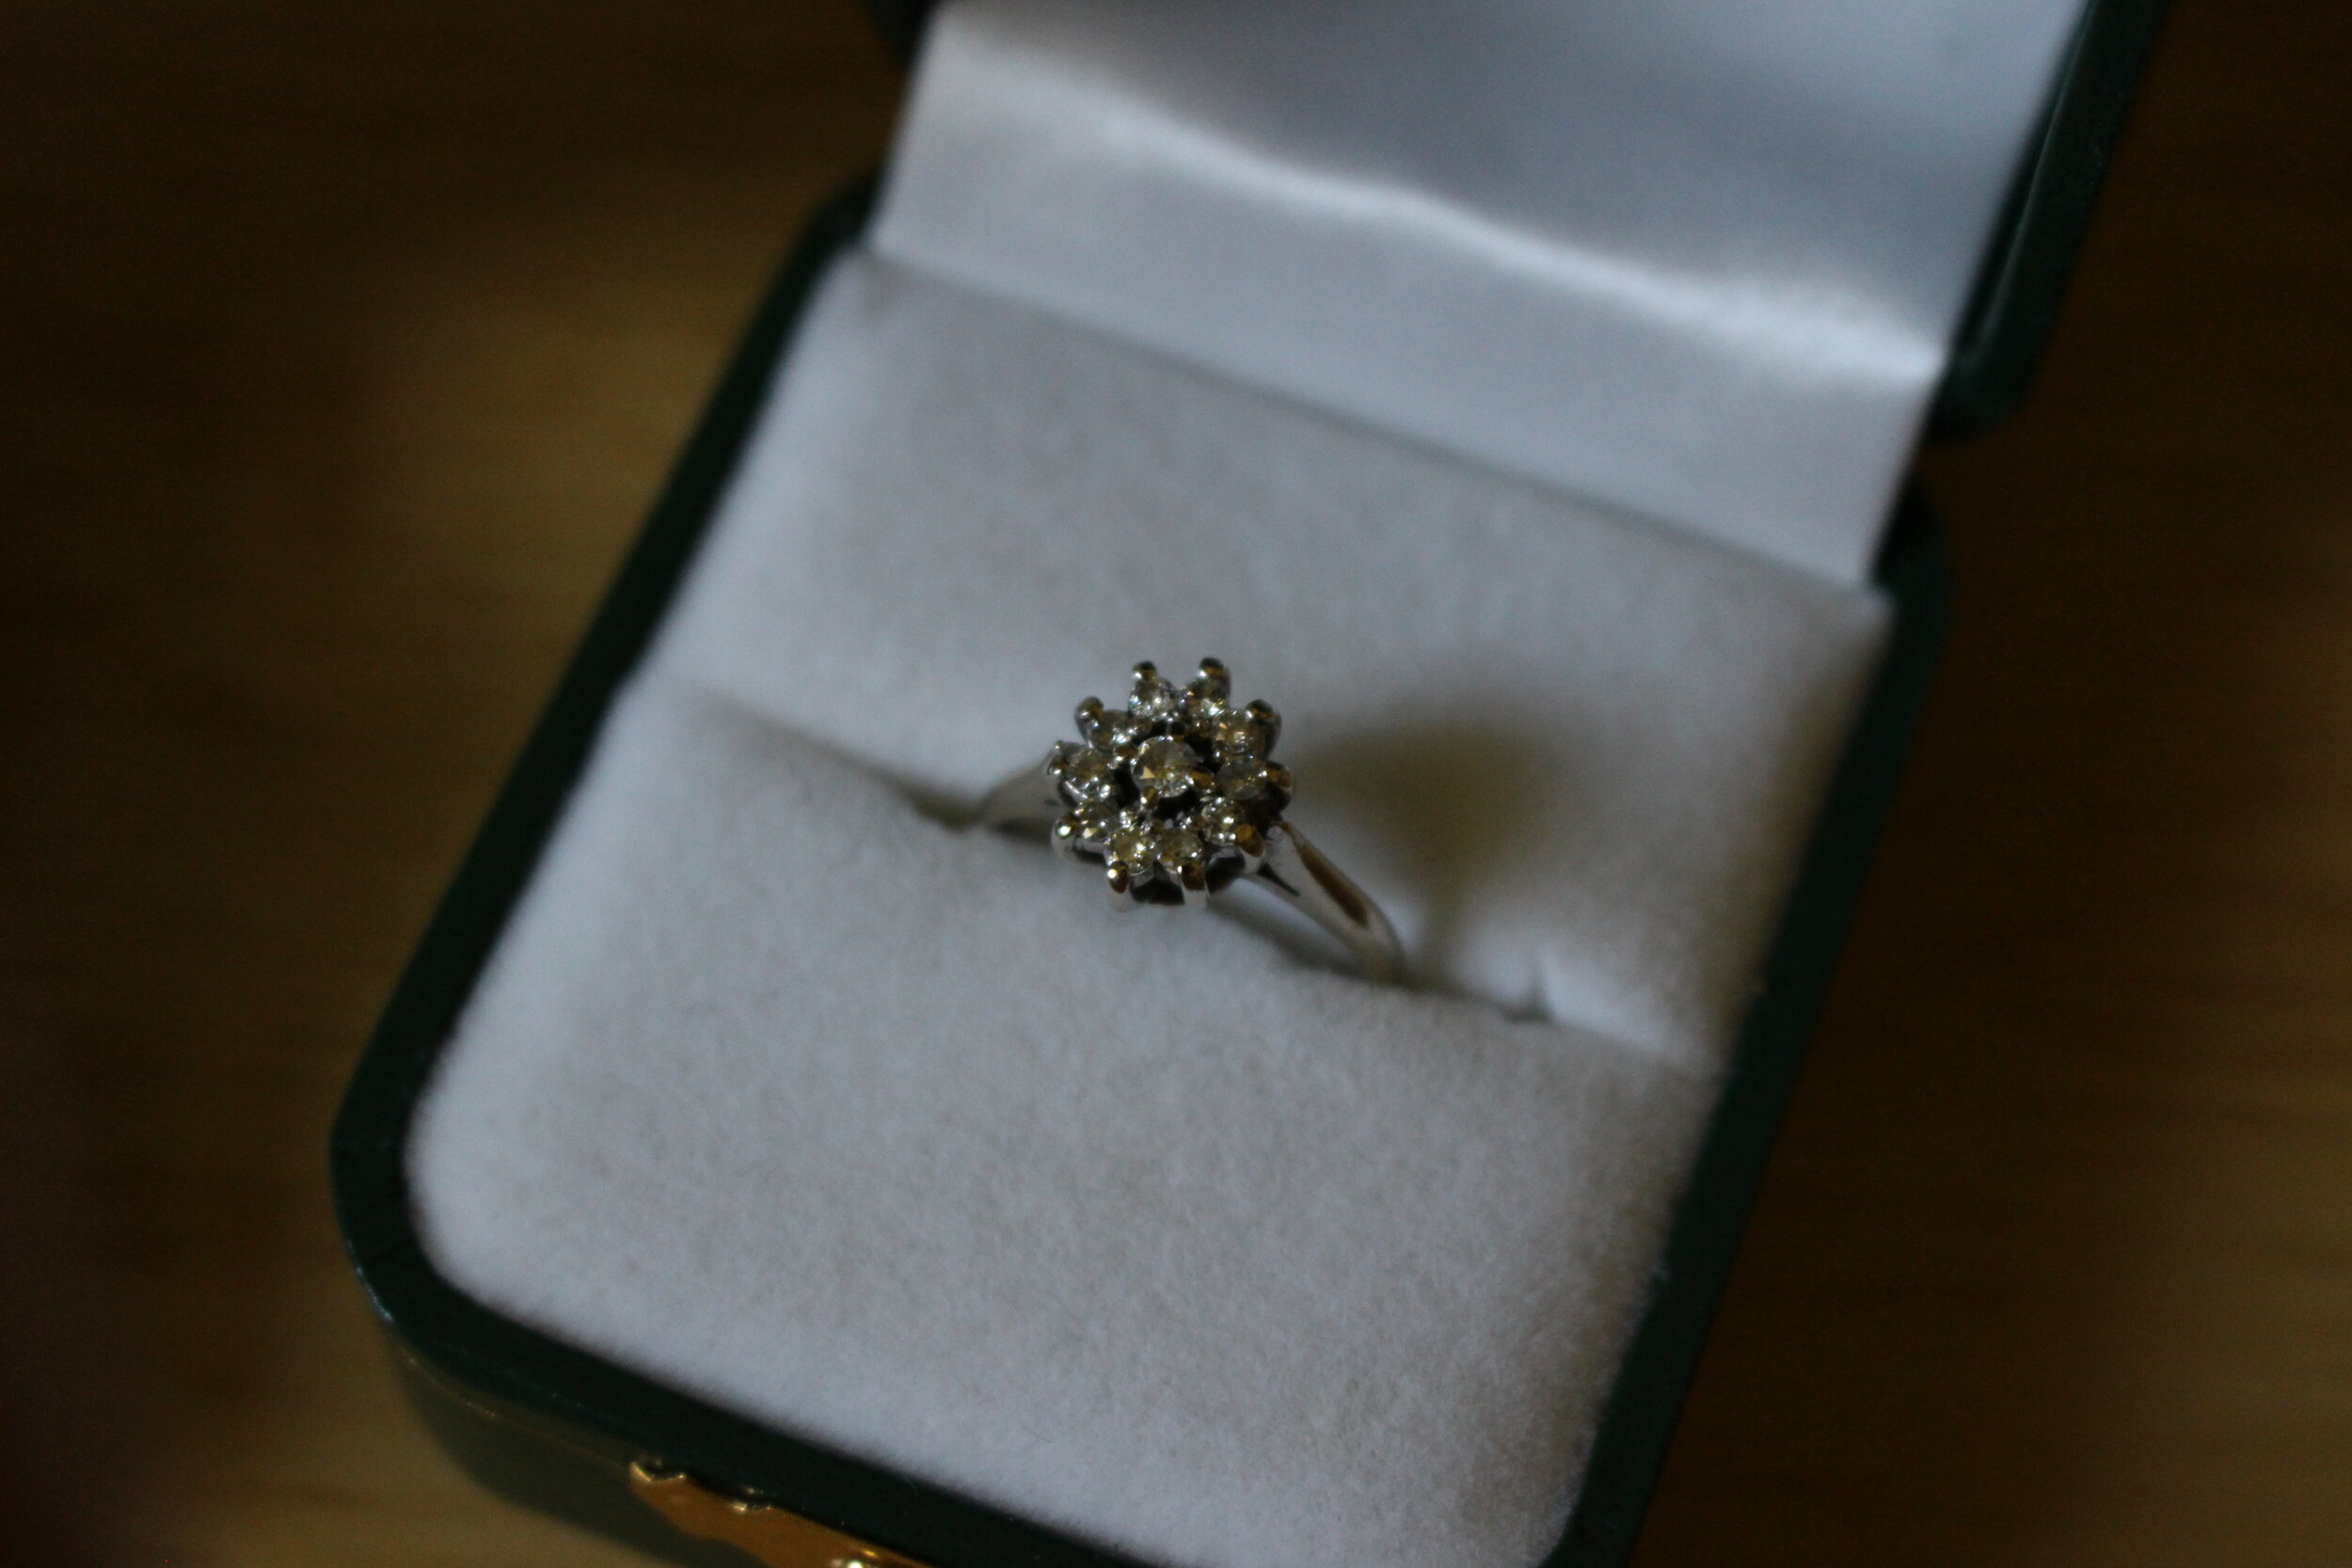 The cleaned diamond ring